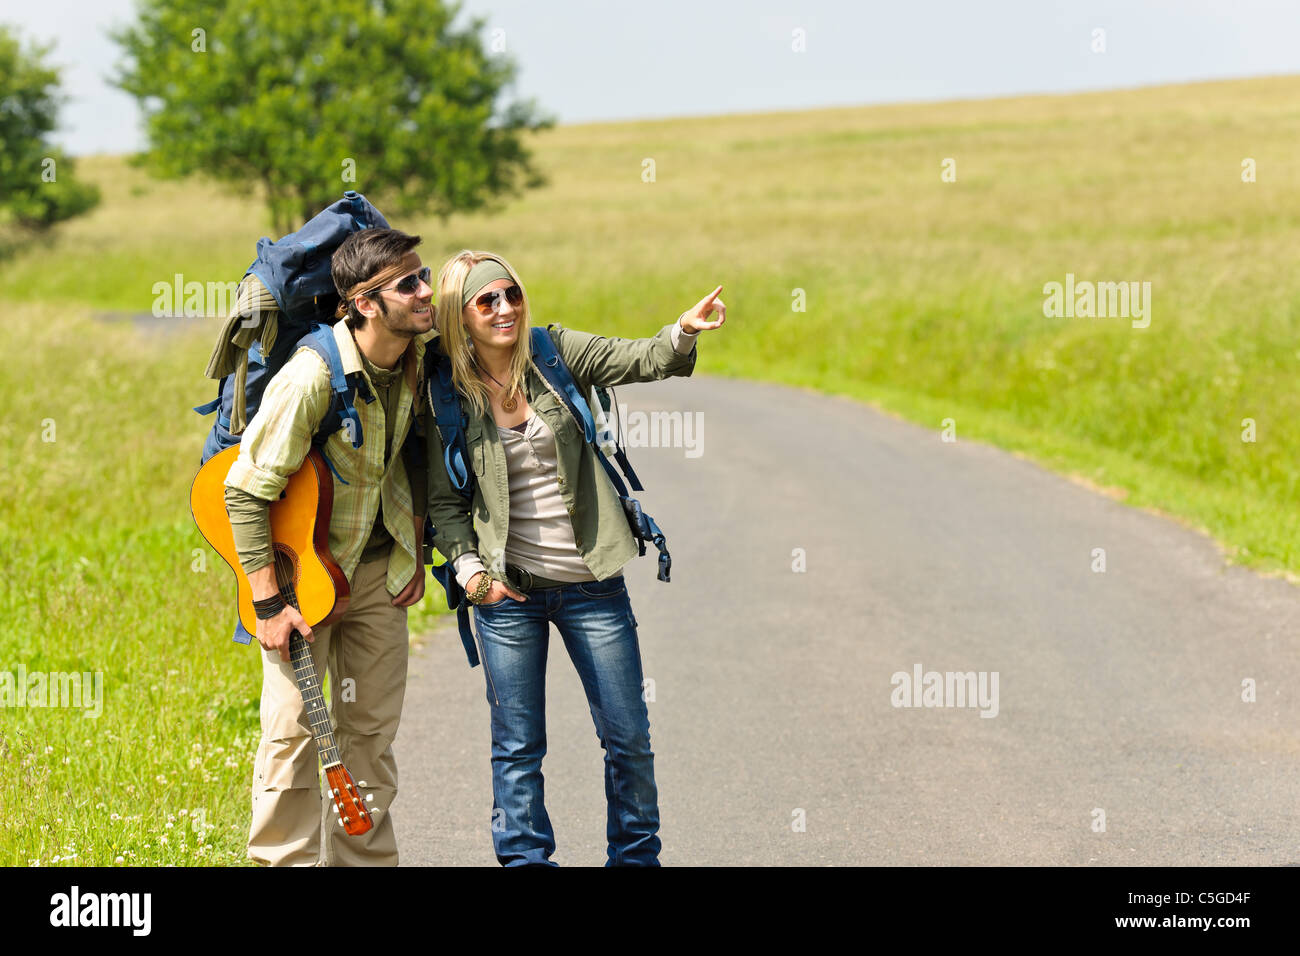 Hiking young couple backpack tramping on asphalt road sunny countryside Stock Photo